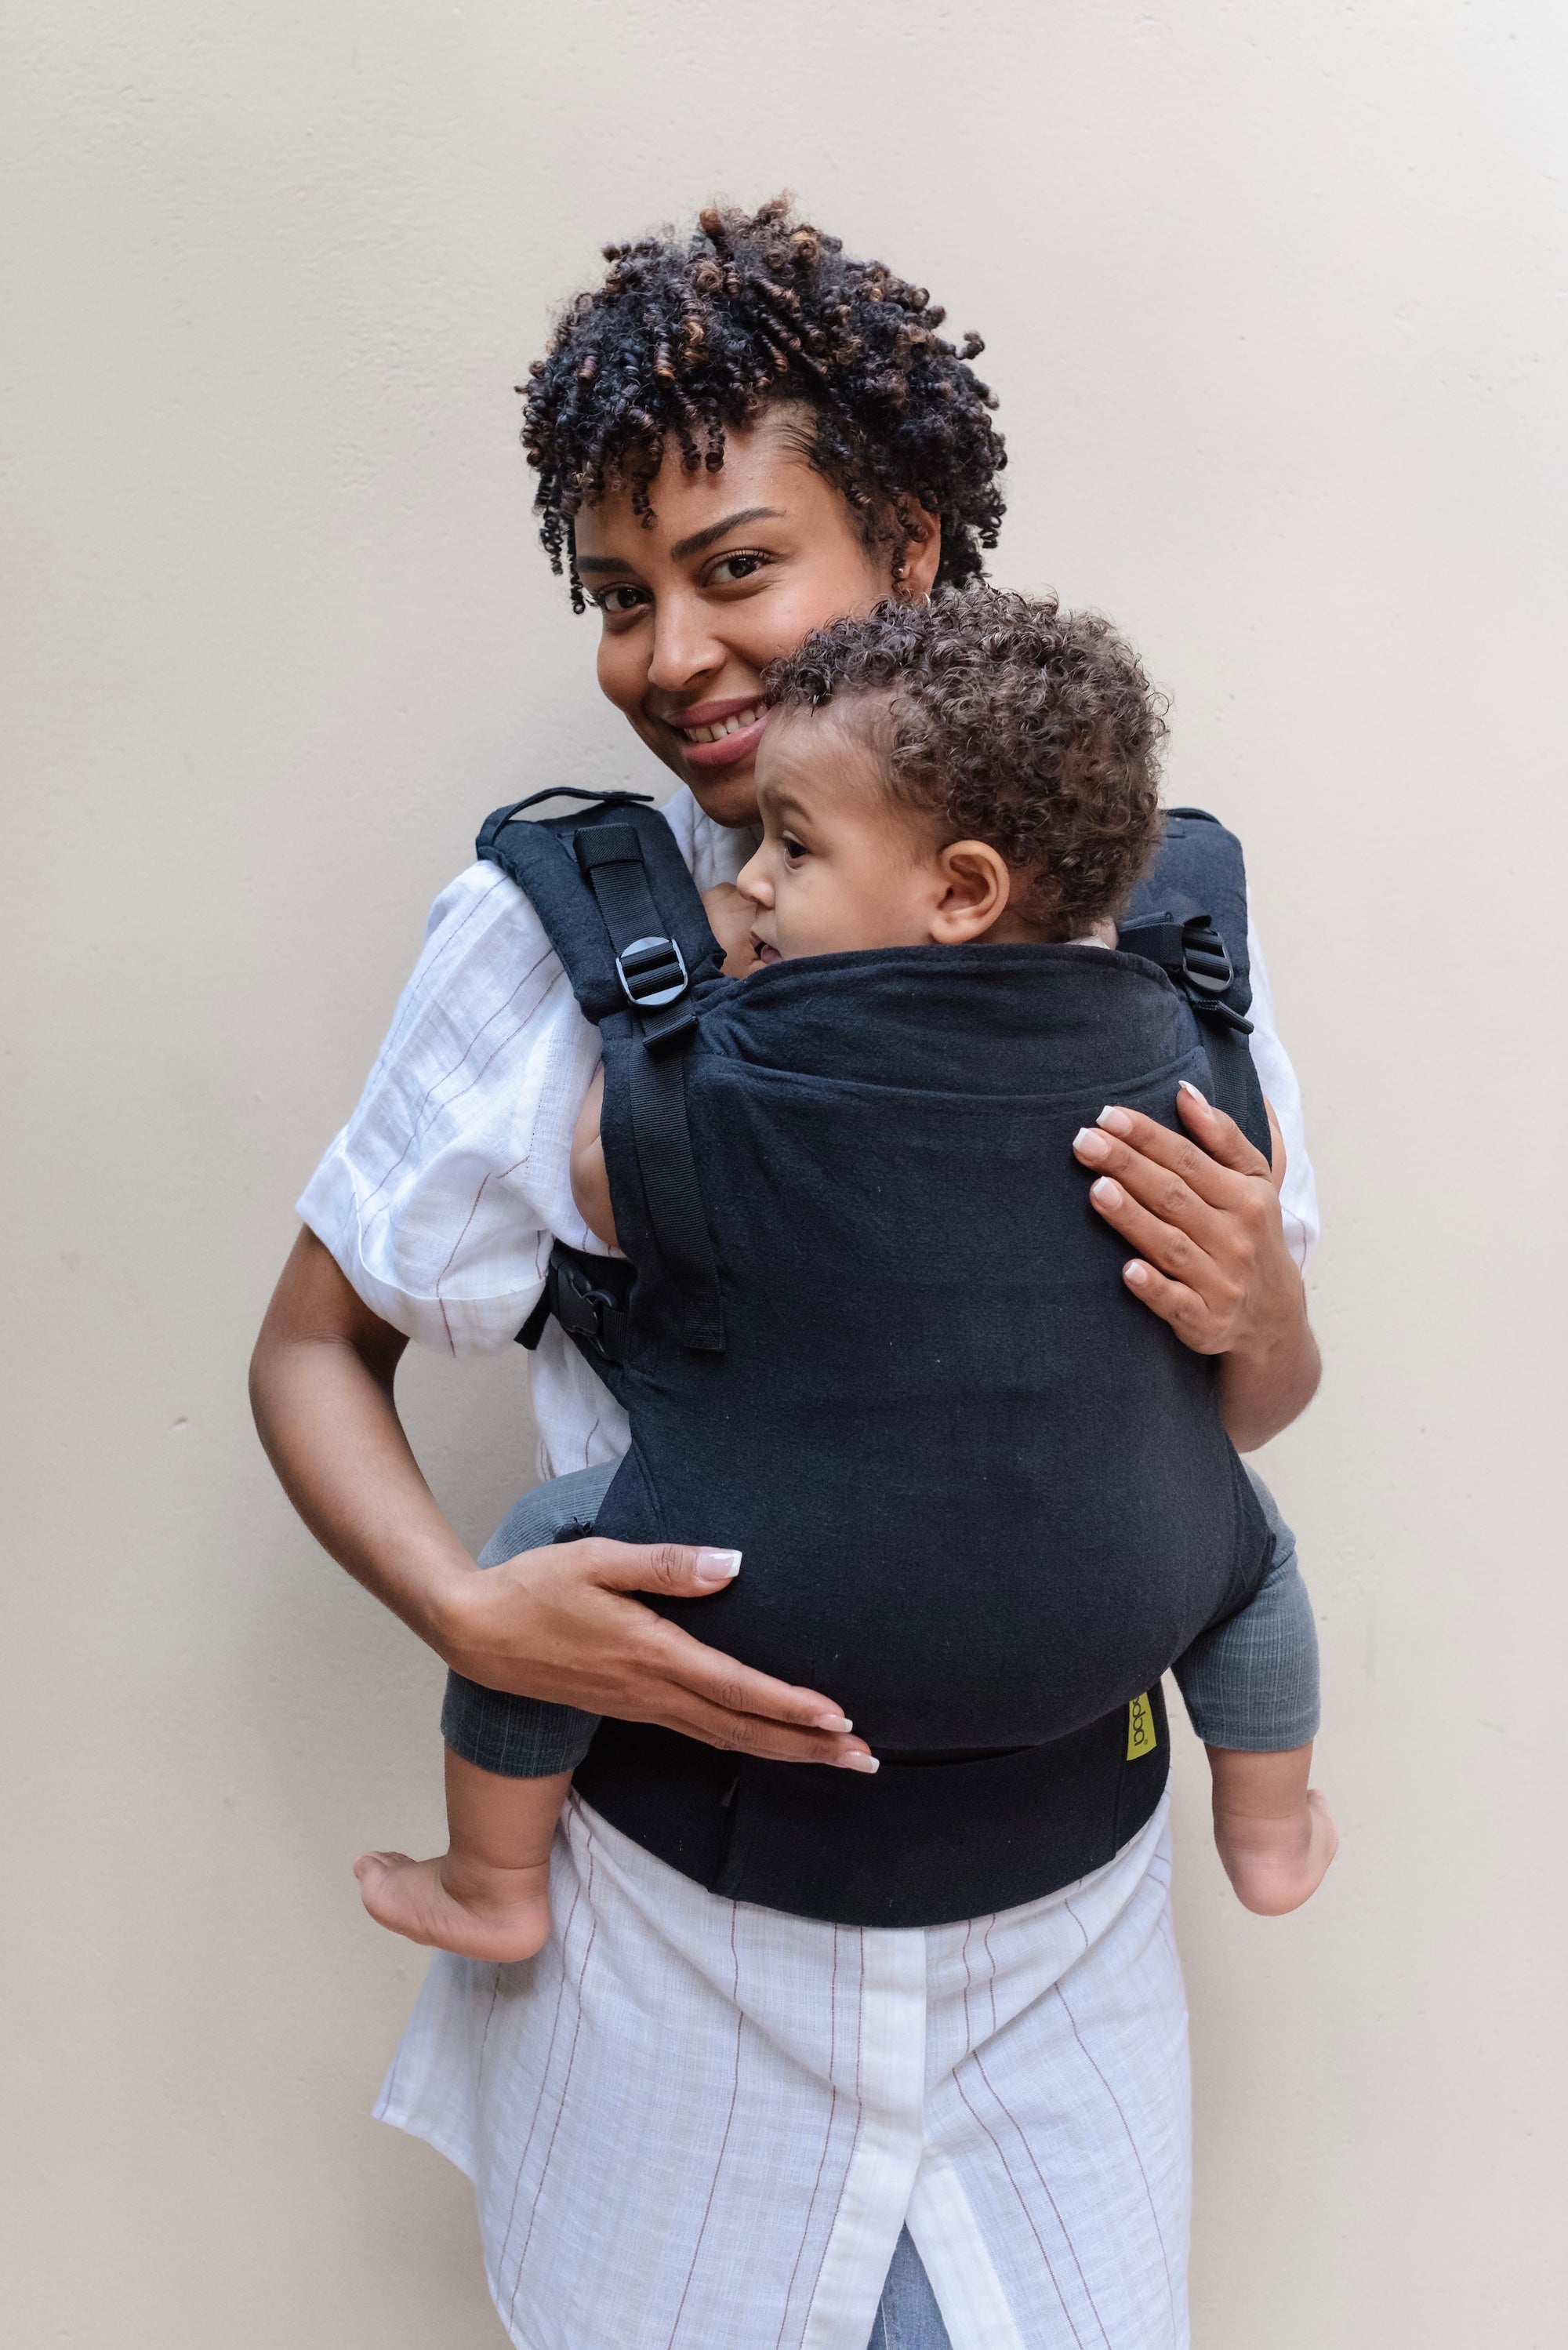 From brand new babies to toddlers - make sure they're comfortable while they grow with the Boba X baby carrier! This adjustable carrier features a linen blend fabric that ensures both you and your child get the all the support you need.